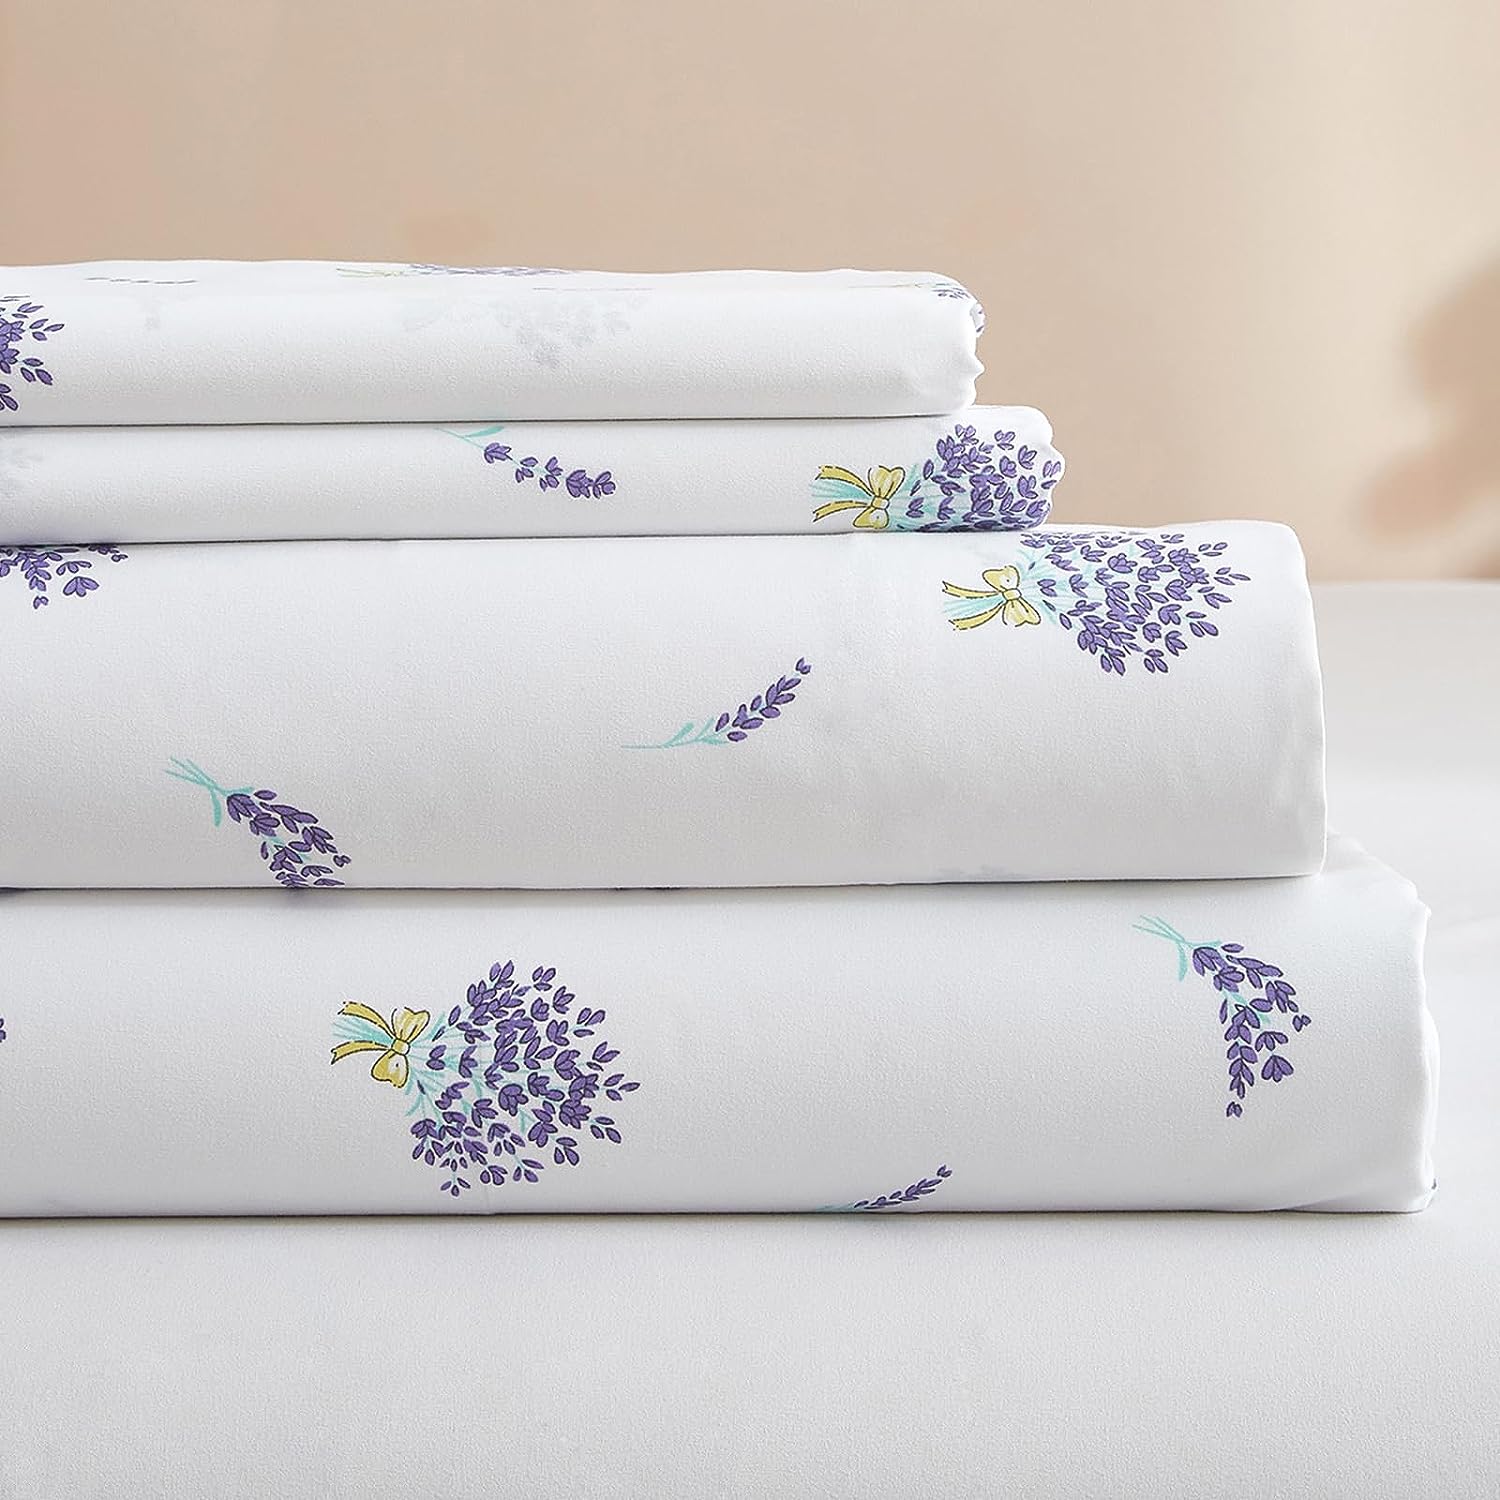 HighBuy Luxury Soft Queen Sheets Set White - Vintage Floral Sheets